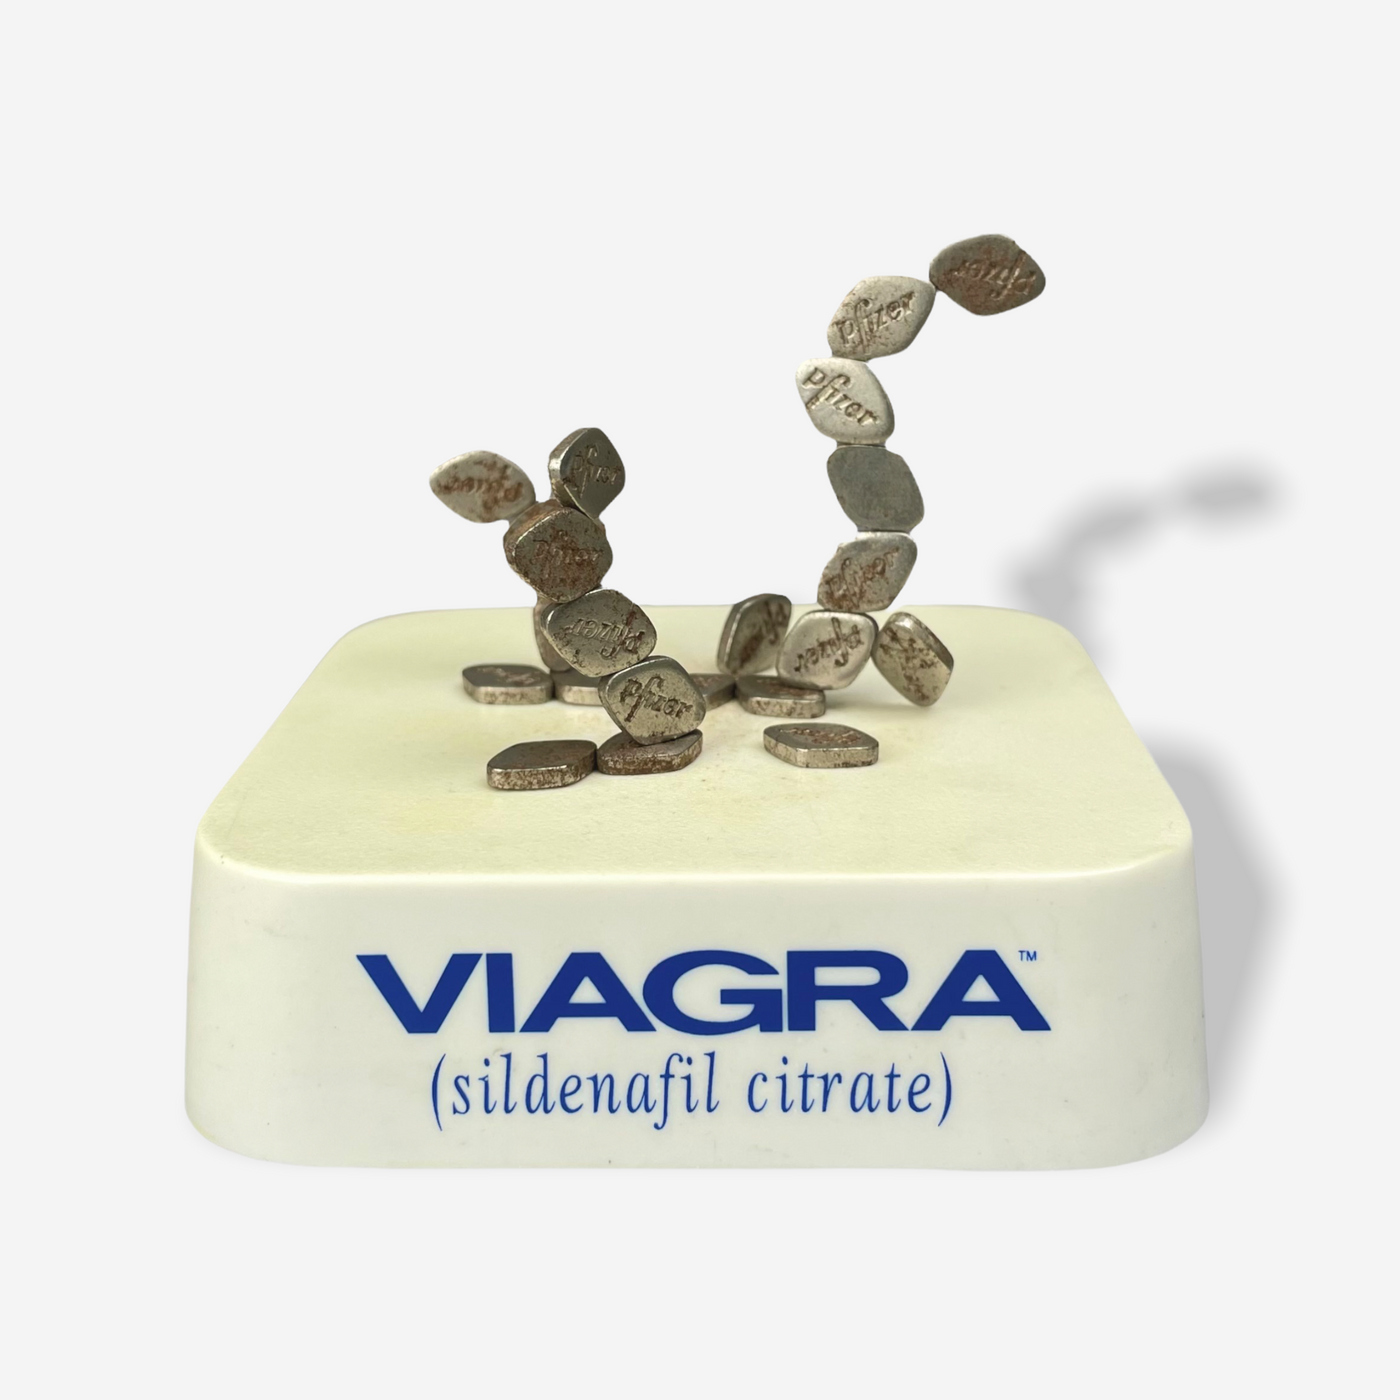 LATE 90s MAGNETIC VIAGRA ORNAMENT